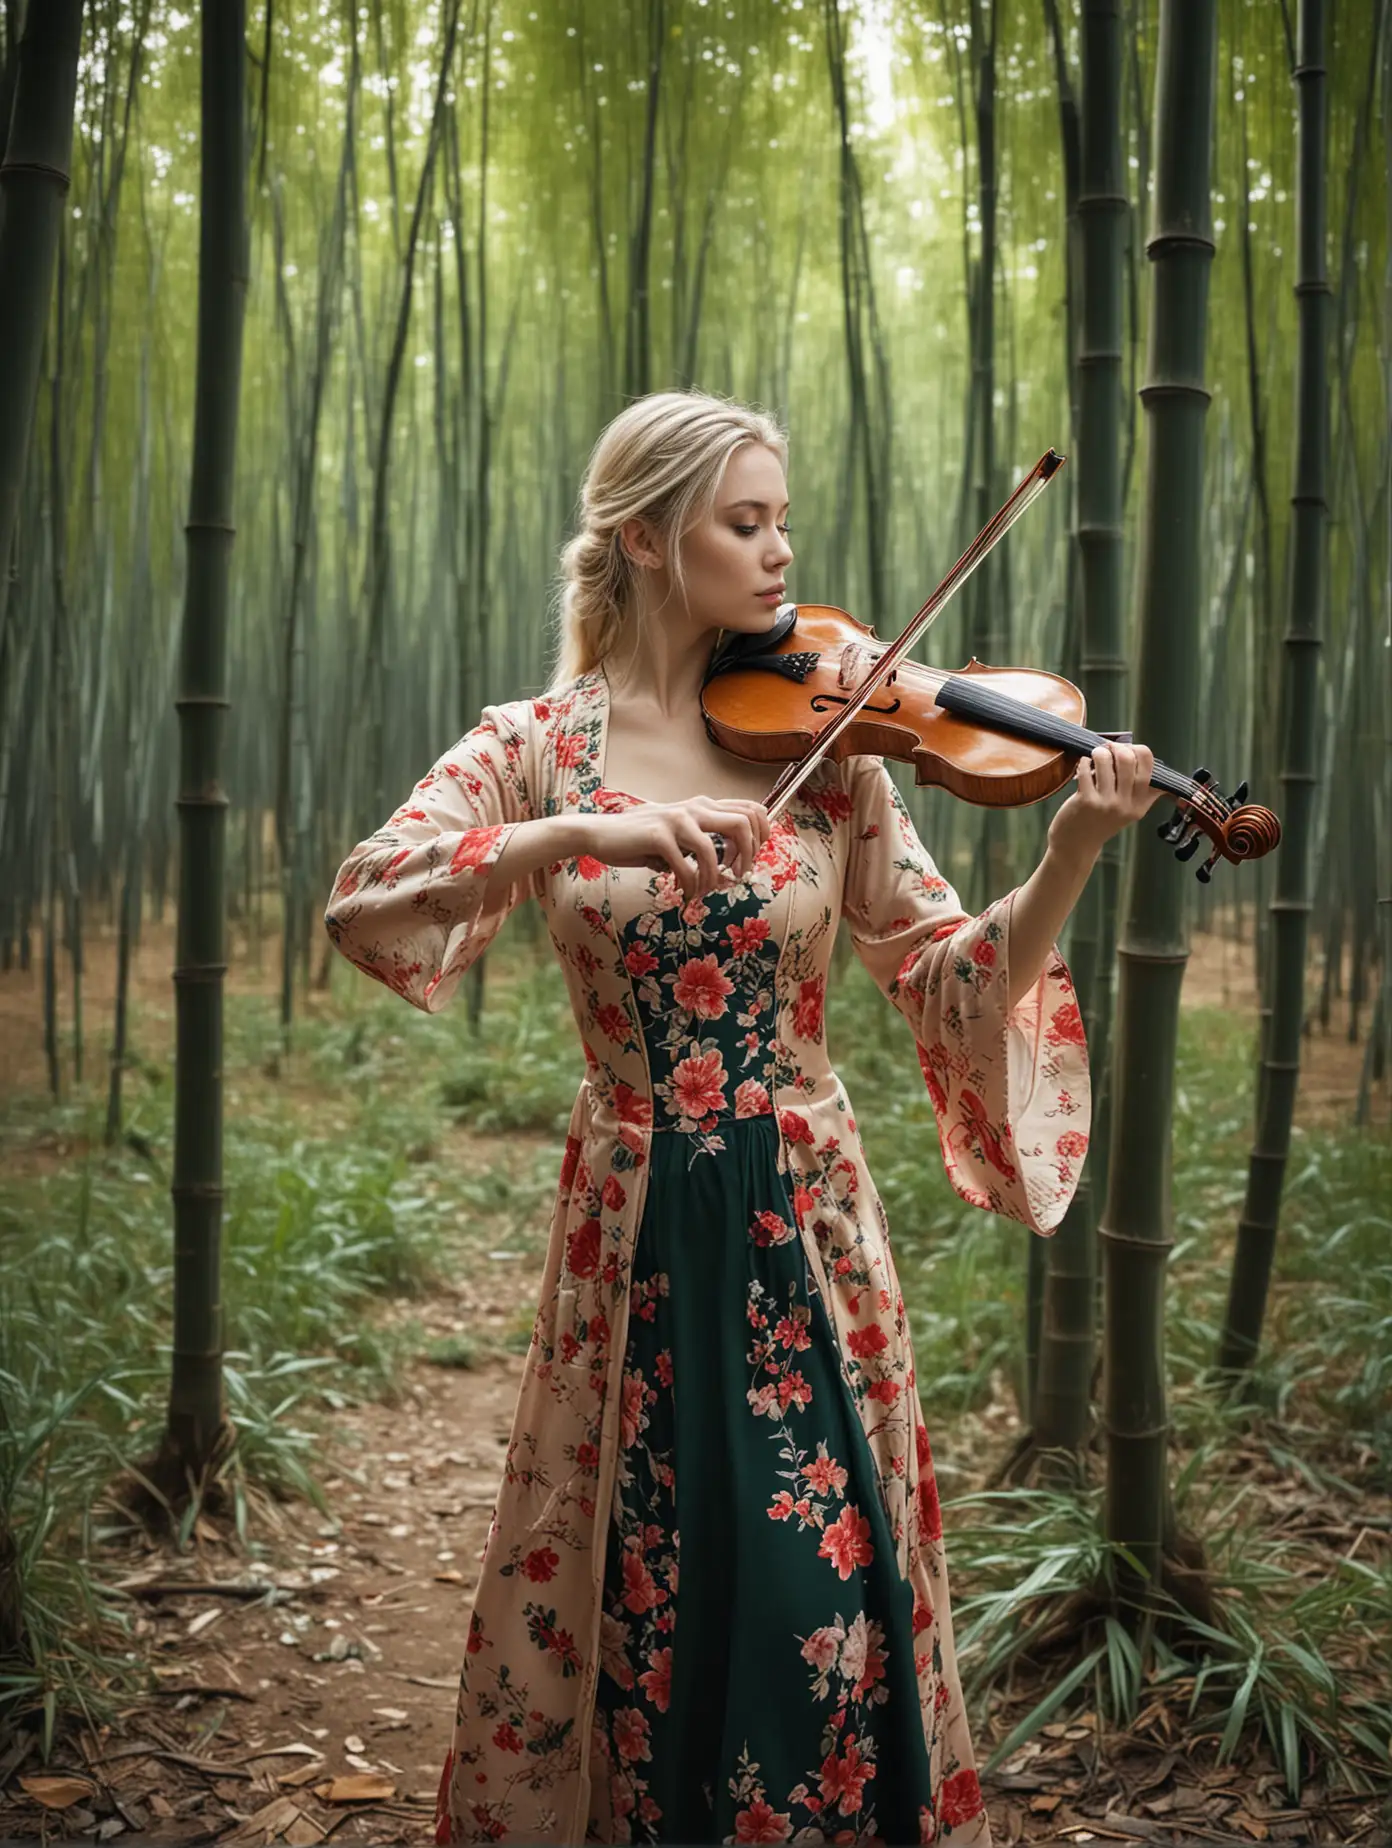 Blonde-Woman-in-Chinese-Dress-Playing-Violin-in-Bamboo-Forest